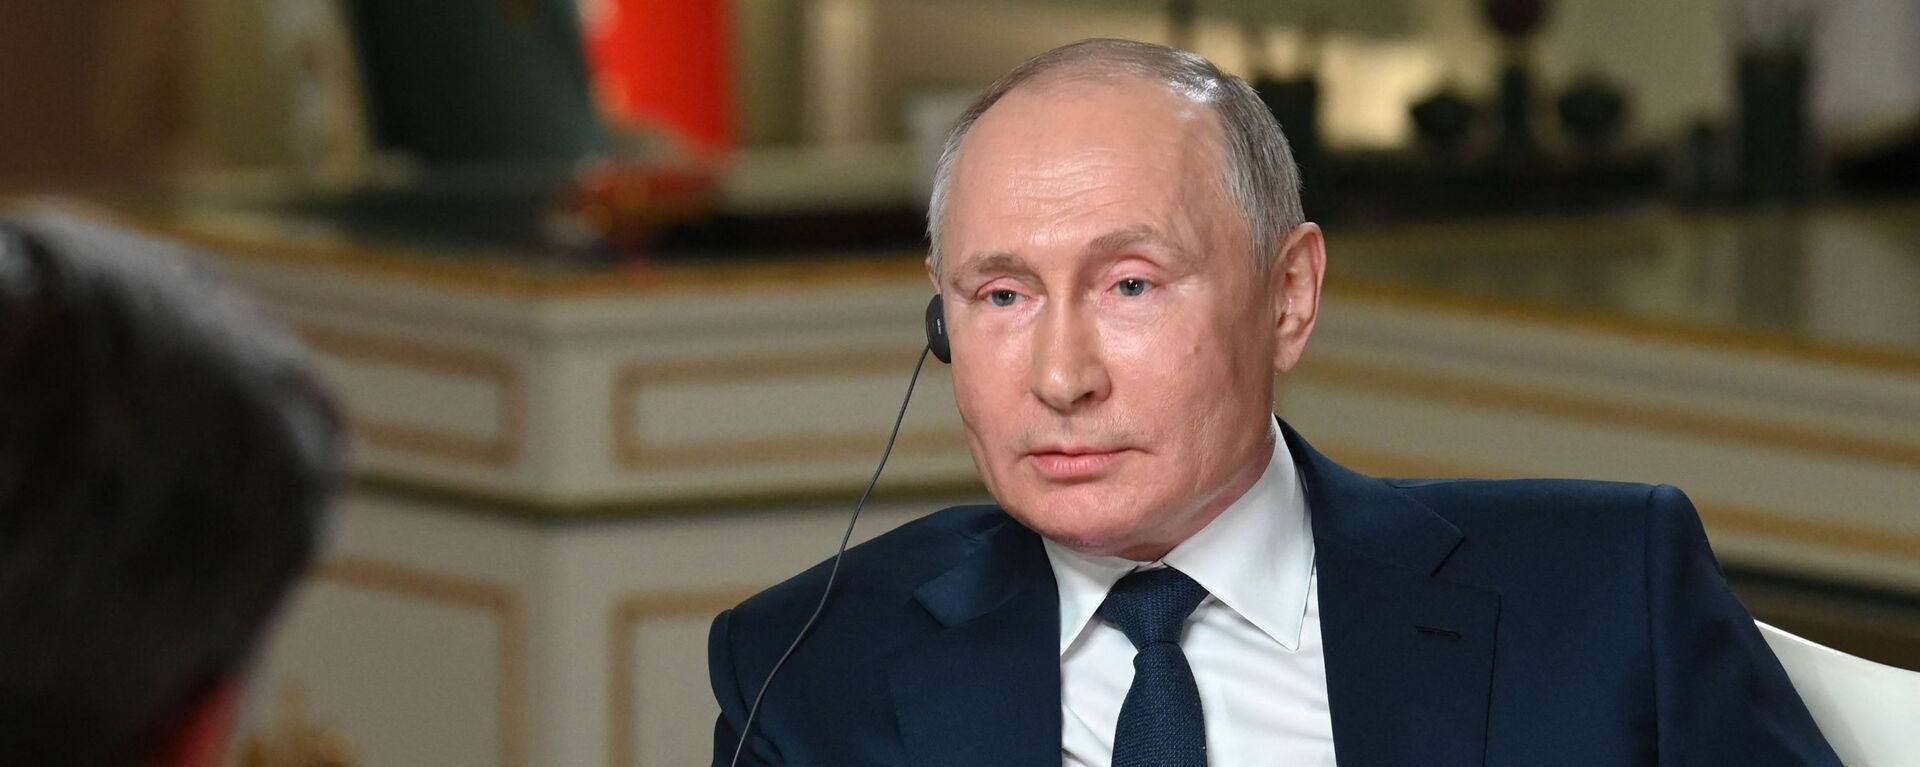 Russia's President Vladimir Putin (R) speaks with journalist of NBC News Keir Simmons in Moscow on June 11, 2021, during an exclusive interview ahead of a meeting with US President. - Sputnik International, 1920, 14.06.2021